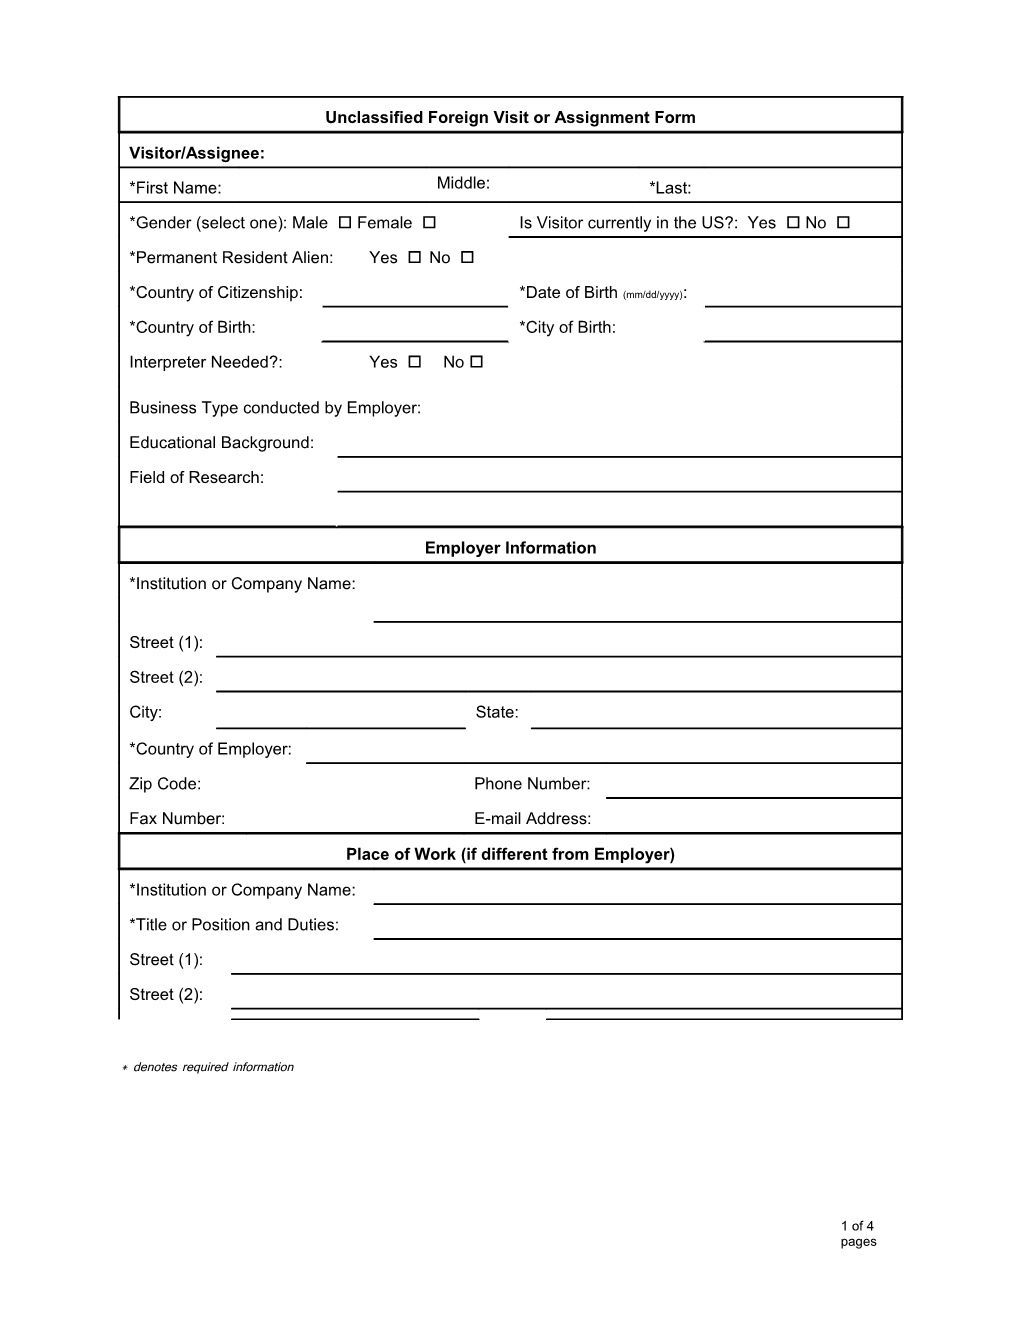 Unclassified Foreign Visit Or Assignment Form